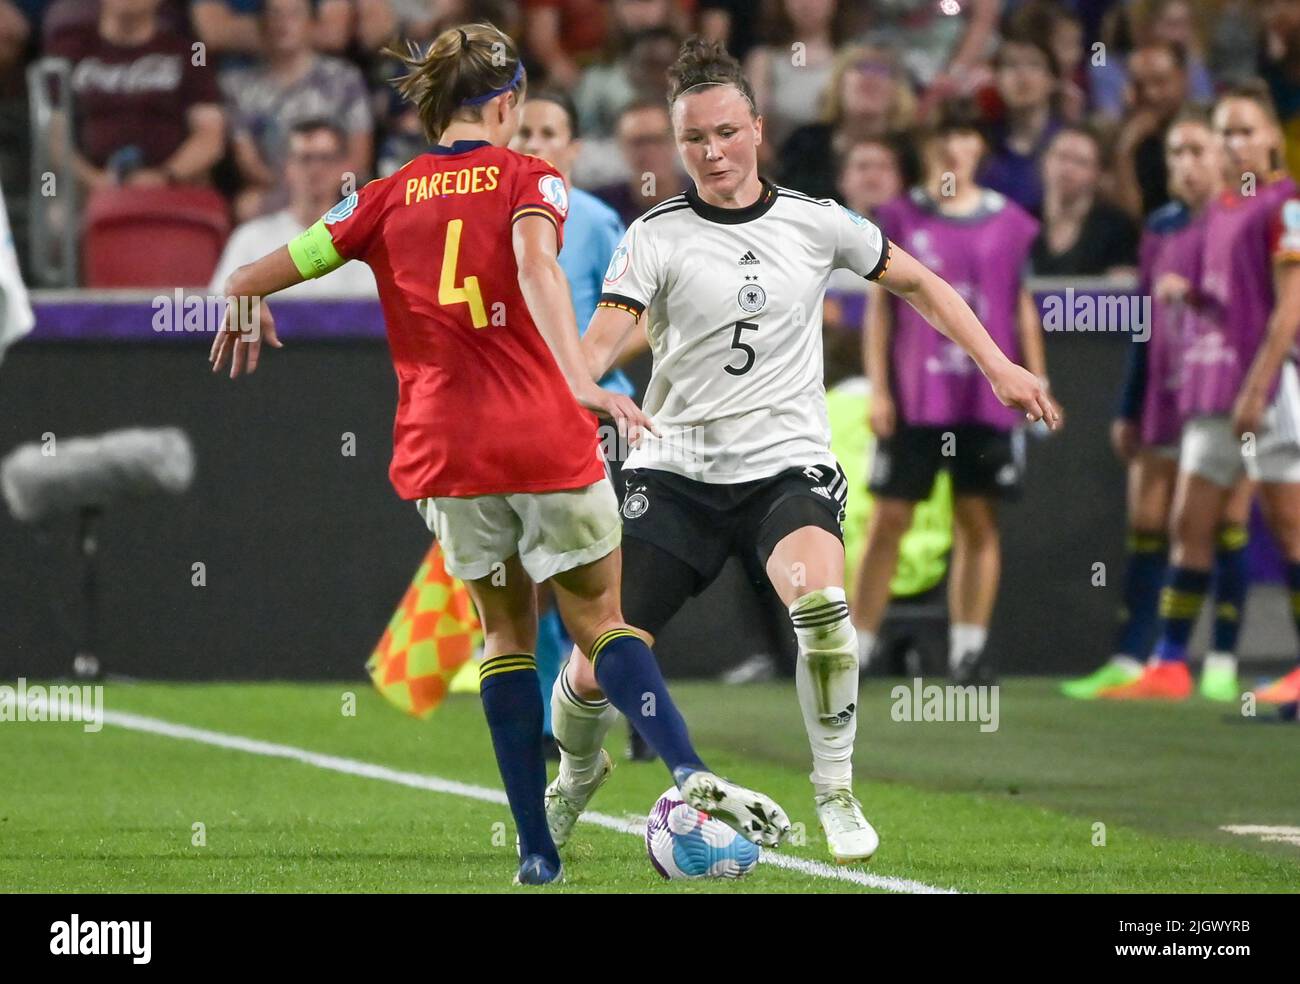 London, UK. 12th July, 2022. Soccer, women: European Championship, Germany - Spain, preliminary round, Germany's Marina Hegering (r) in a duel with Irene Paredes. Credit: Sebastian Gollnow/dpa/Alamy Live News Stock Photo